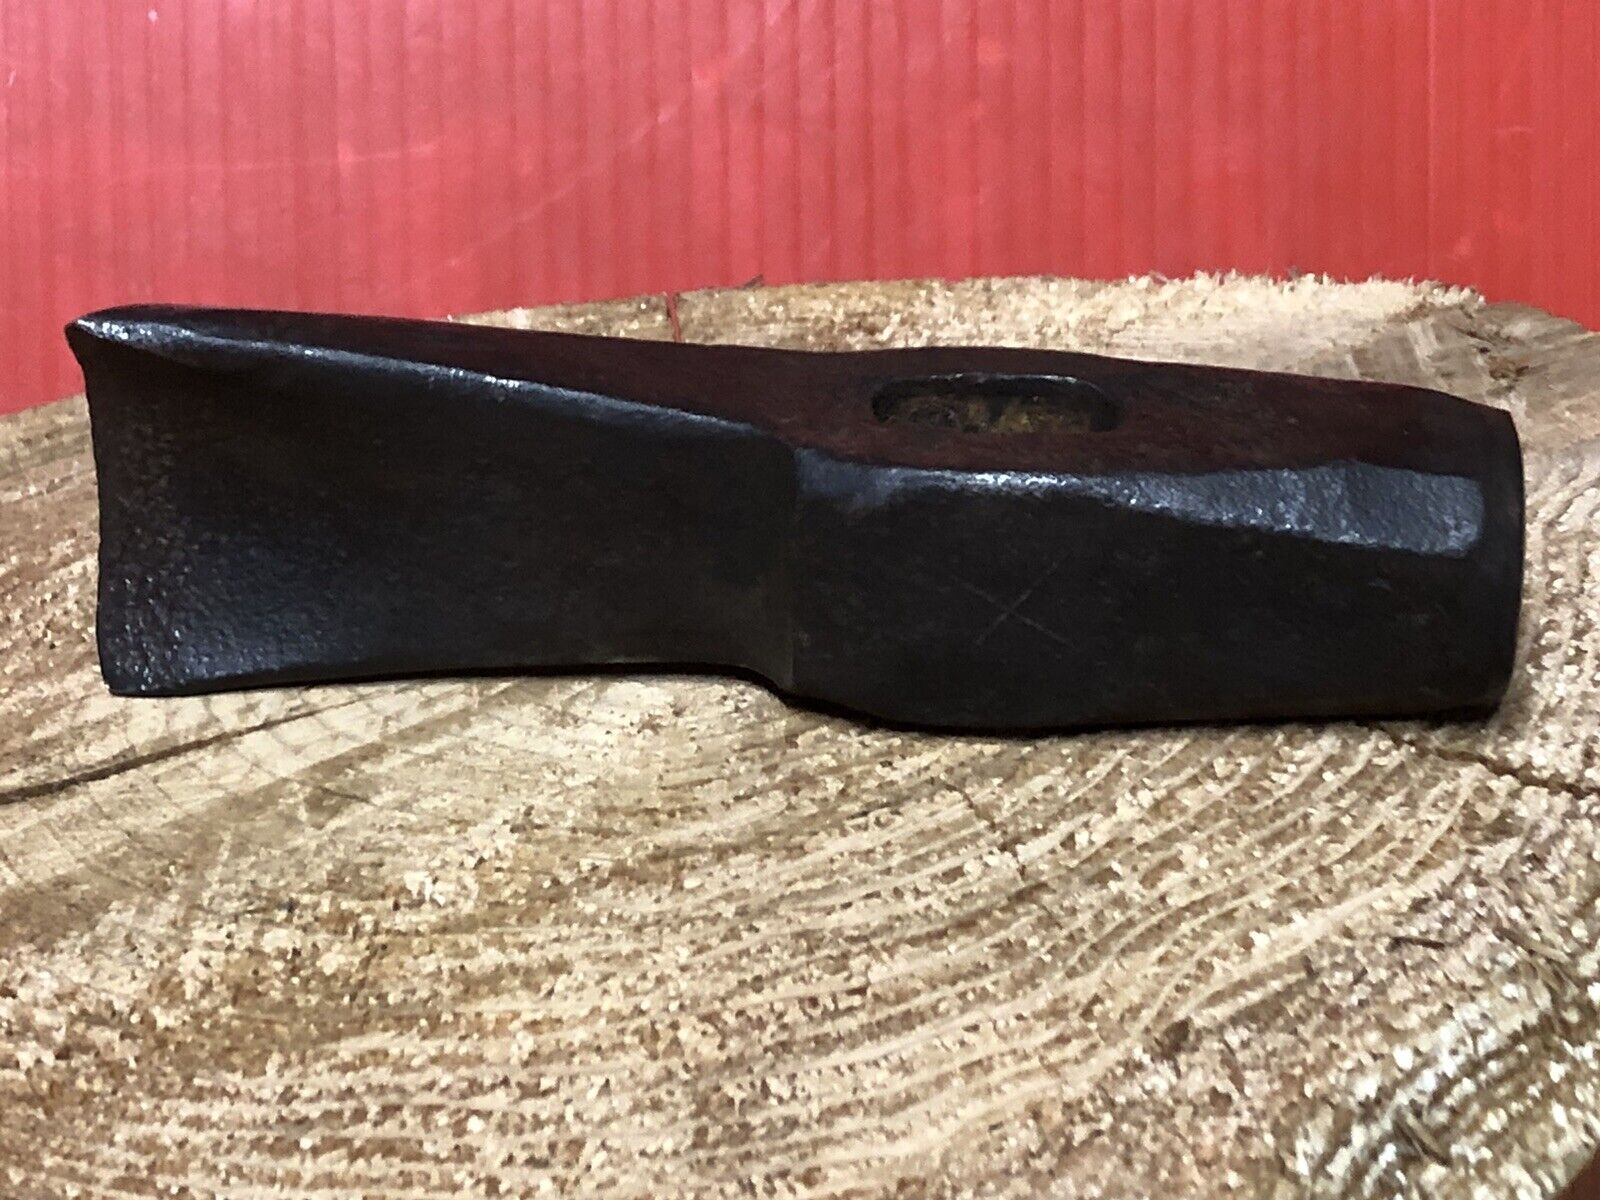 Unique Old Iron Tool Head ~ Log / Timber Gouge or Adze Maul Head (2 Lb 6 Oz)